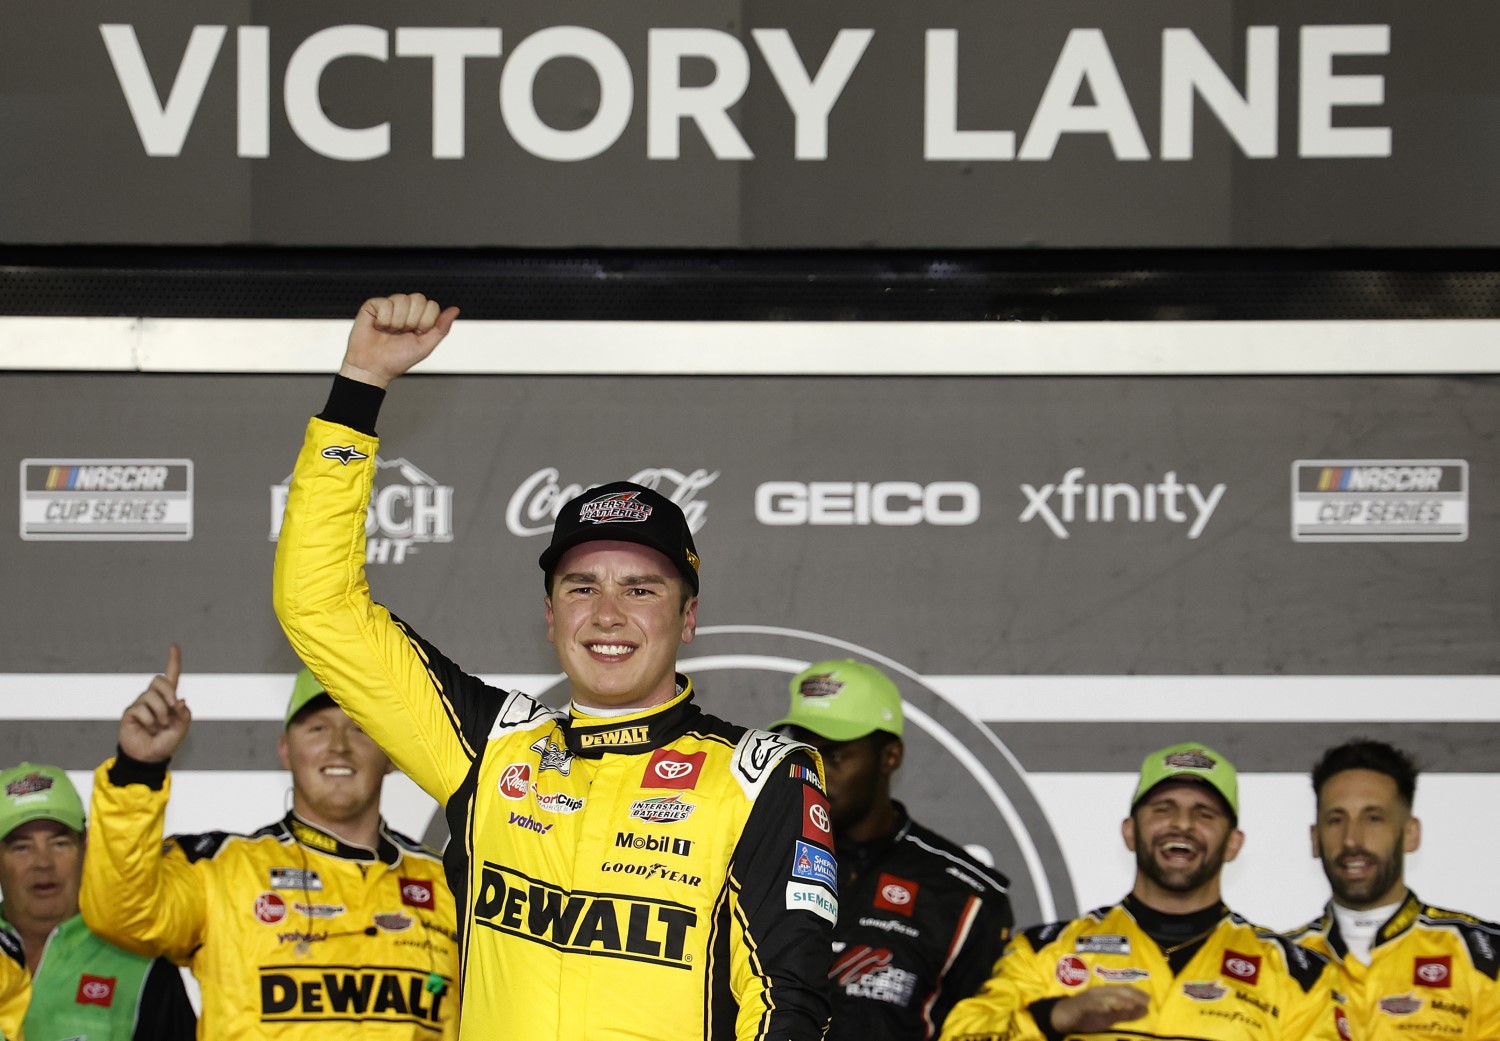 Christopher Bell, driver of the #20 DEWALT/Interstate Batteries Toyota, celebrates in victory lane after winning the NASCAR Cup Series Bluegreen Vacations Duel #2 at Daytona International Speedway on February 15, 2024 in Daytona Beach, Florida. (Photo by Chris Graythen/Getty Images)